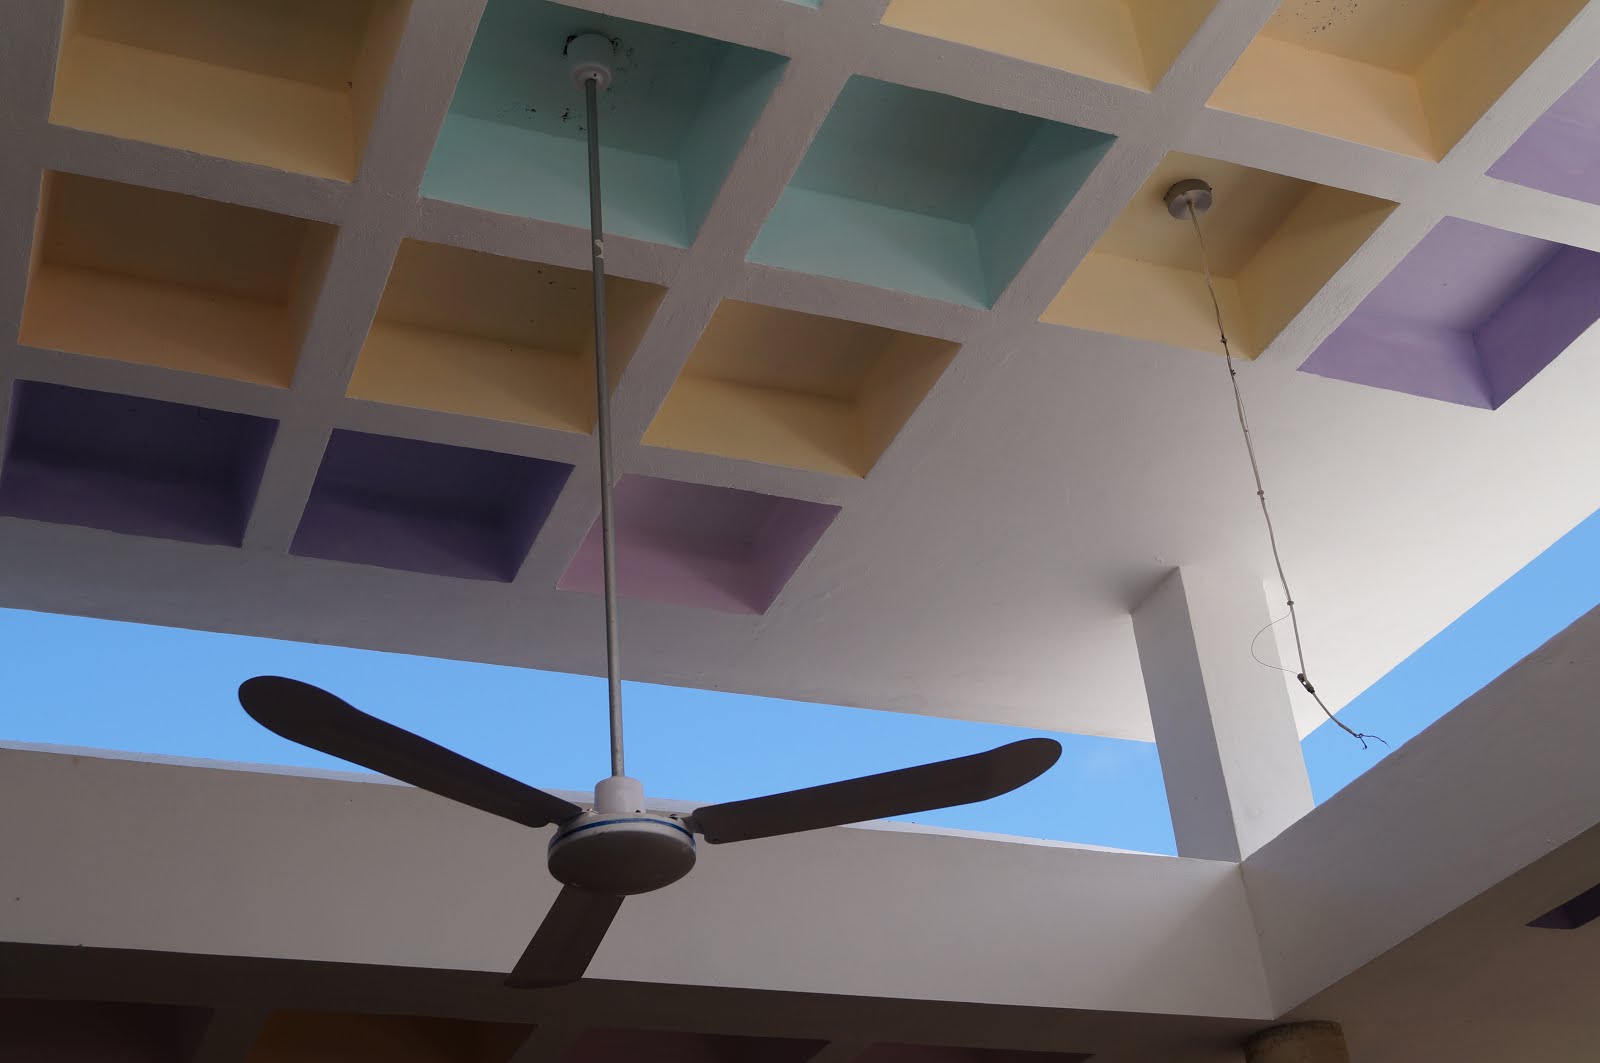 Fan against pastels and sky in Municipal Market of Cozumel